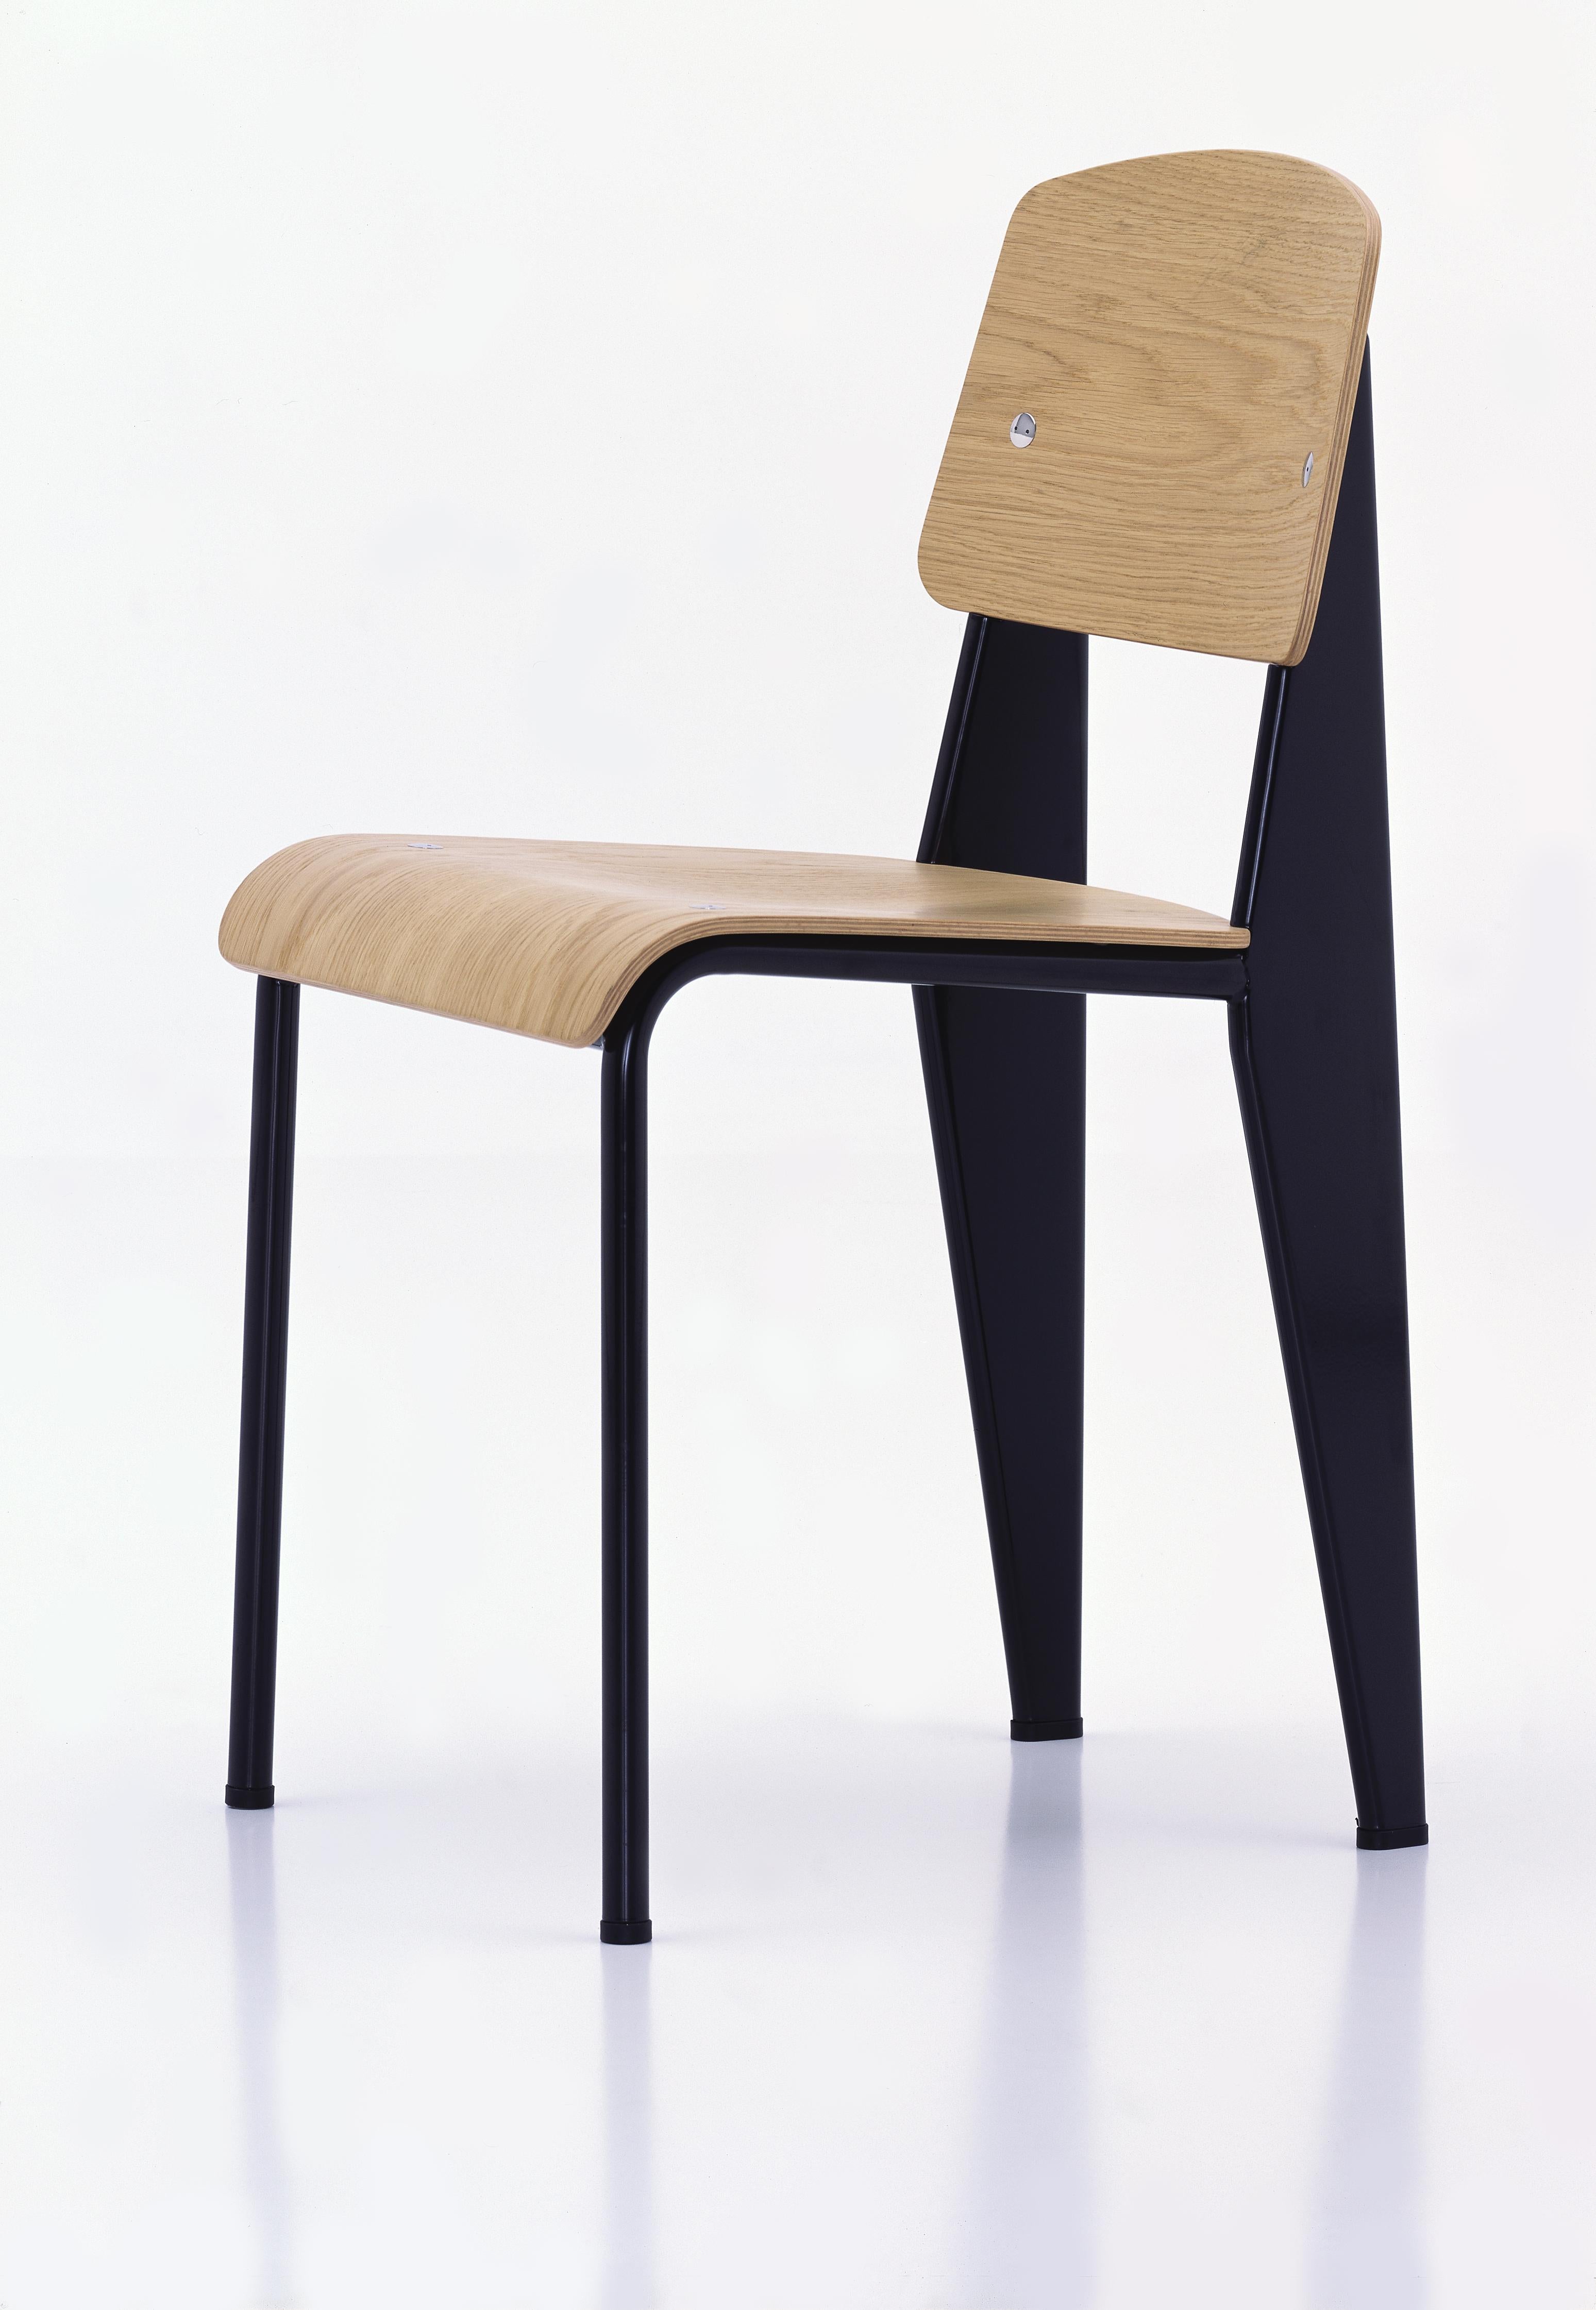 Jean Prouvé Standard Chair in Natural Oak and Blue Metal for Vitra In New Condition For Sale In Glendale, CA